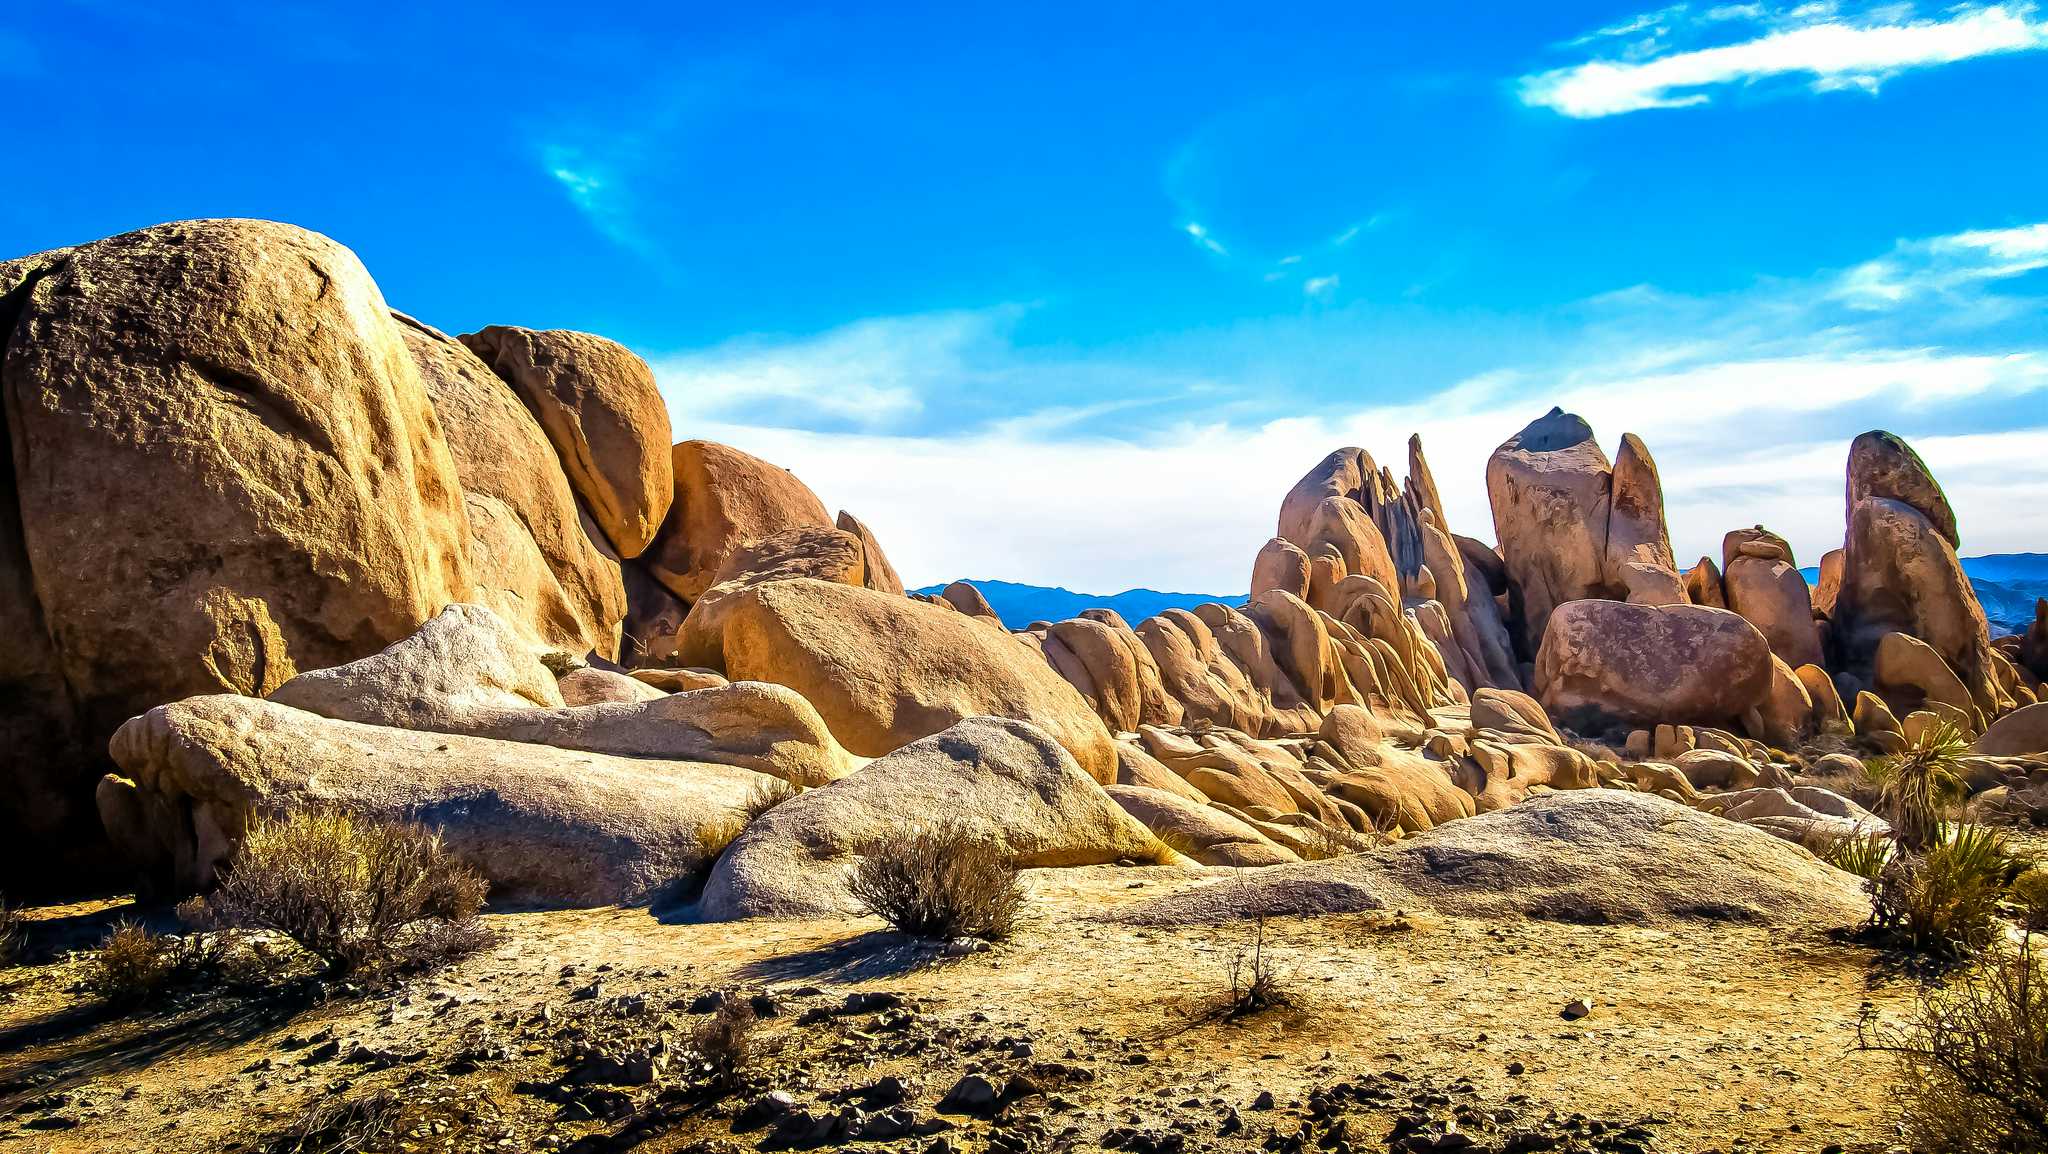 Rock Climbing in California: What are the Best Spots to Go?